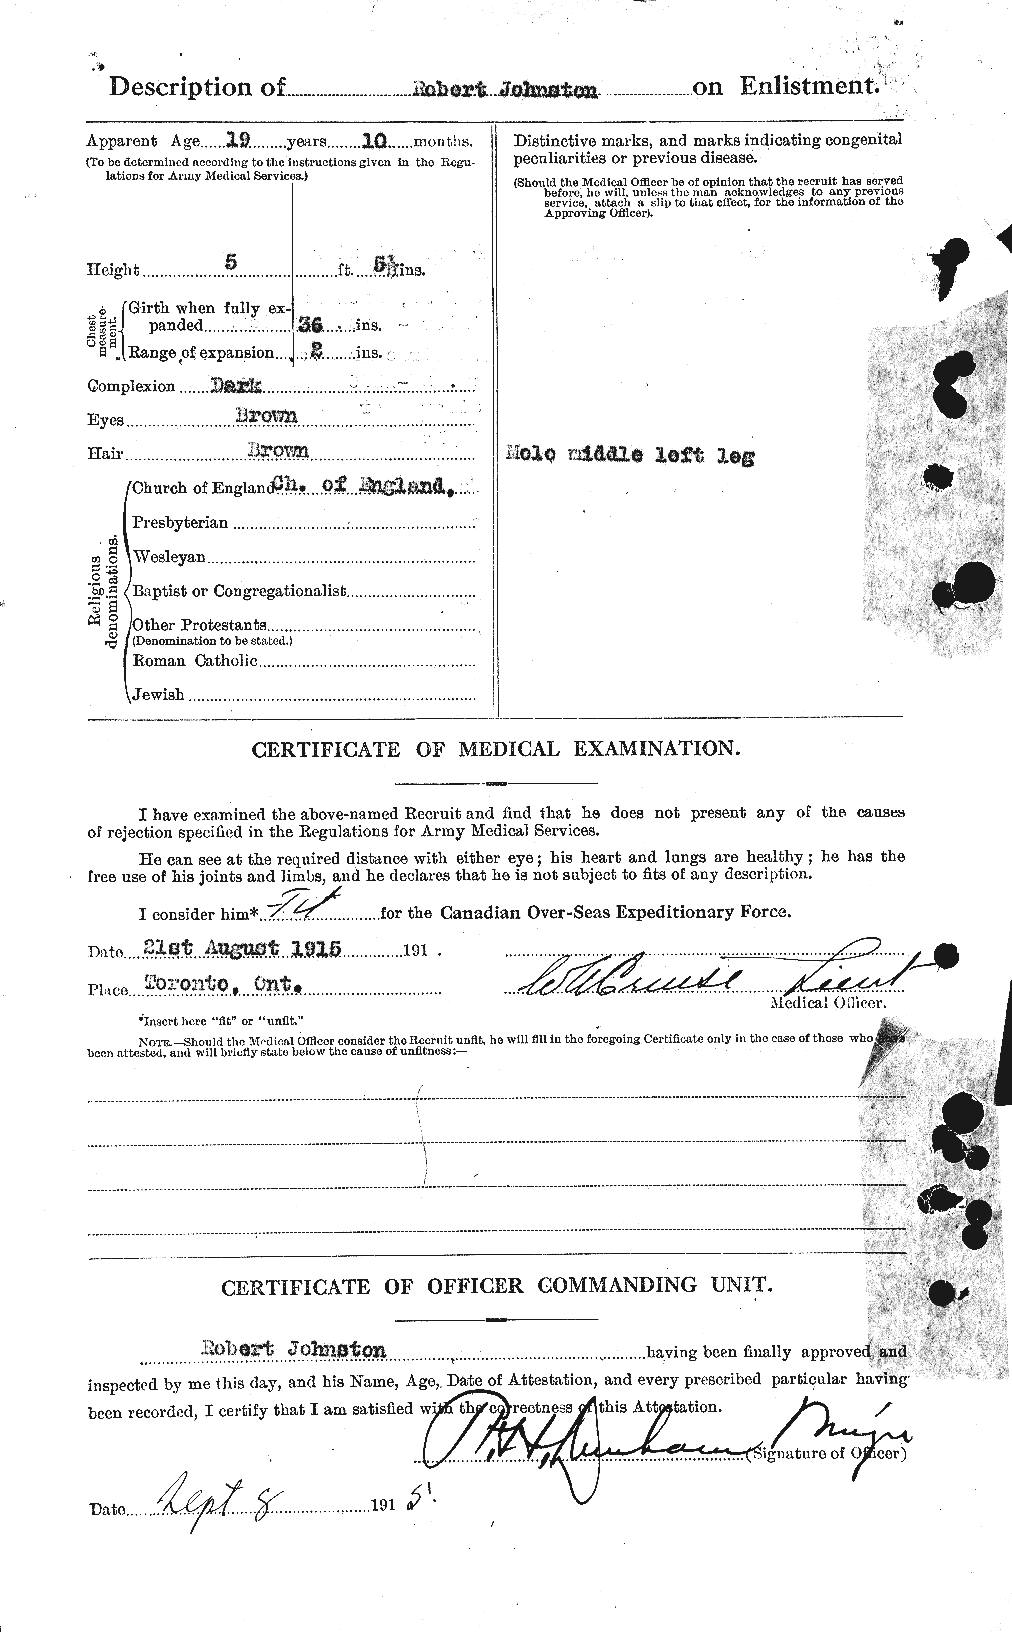 Personnel Records of the First World War - CEF 426997b